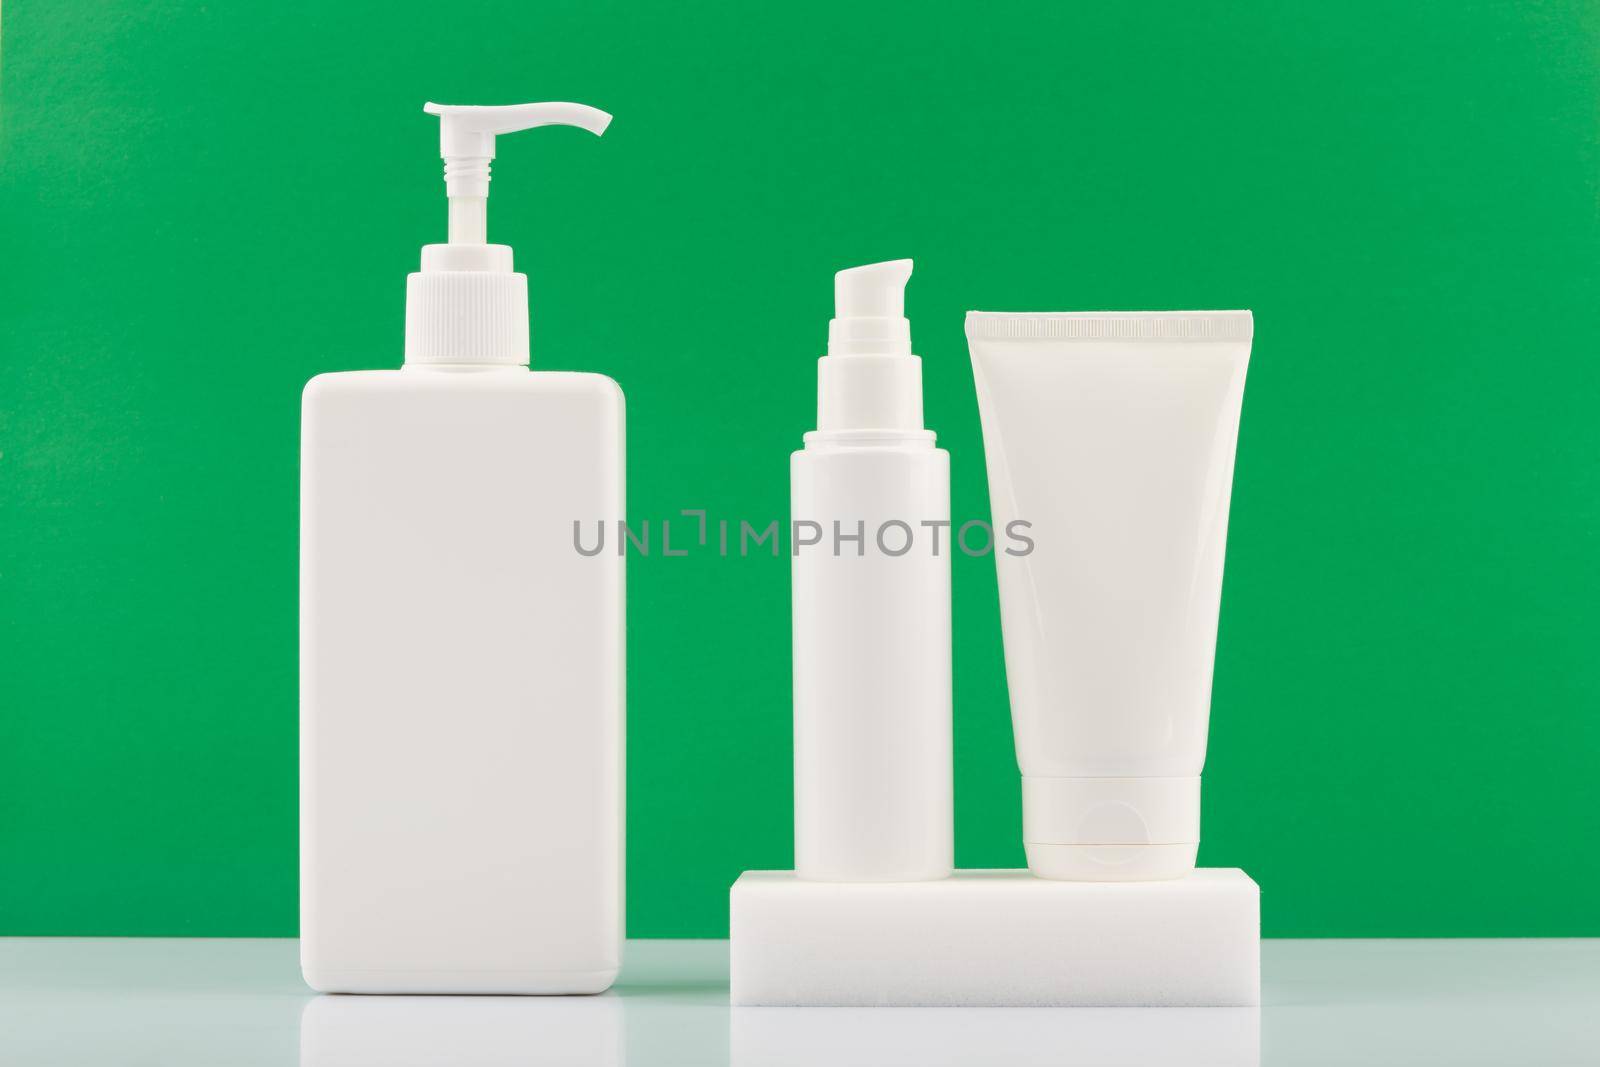 Set of beauty products for skin care in white unbranded tubes against green background. Concept of organic cosmetics by Senorina_Irina